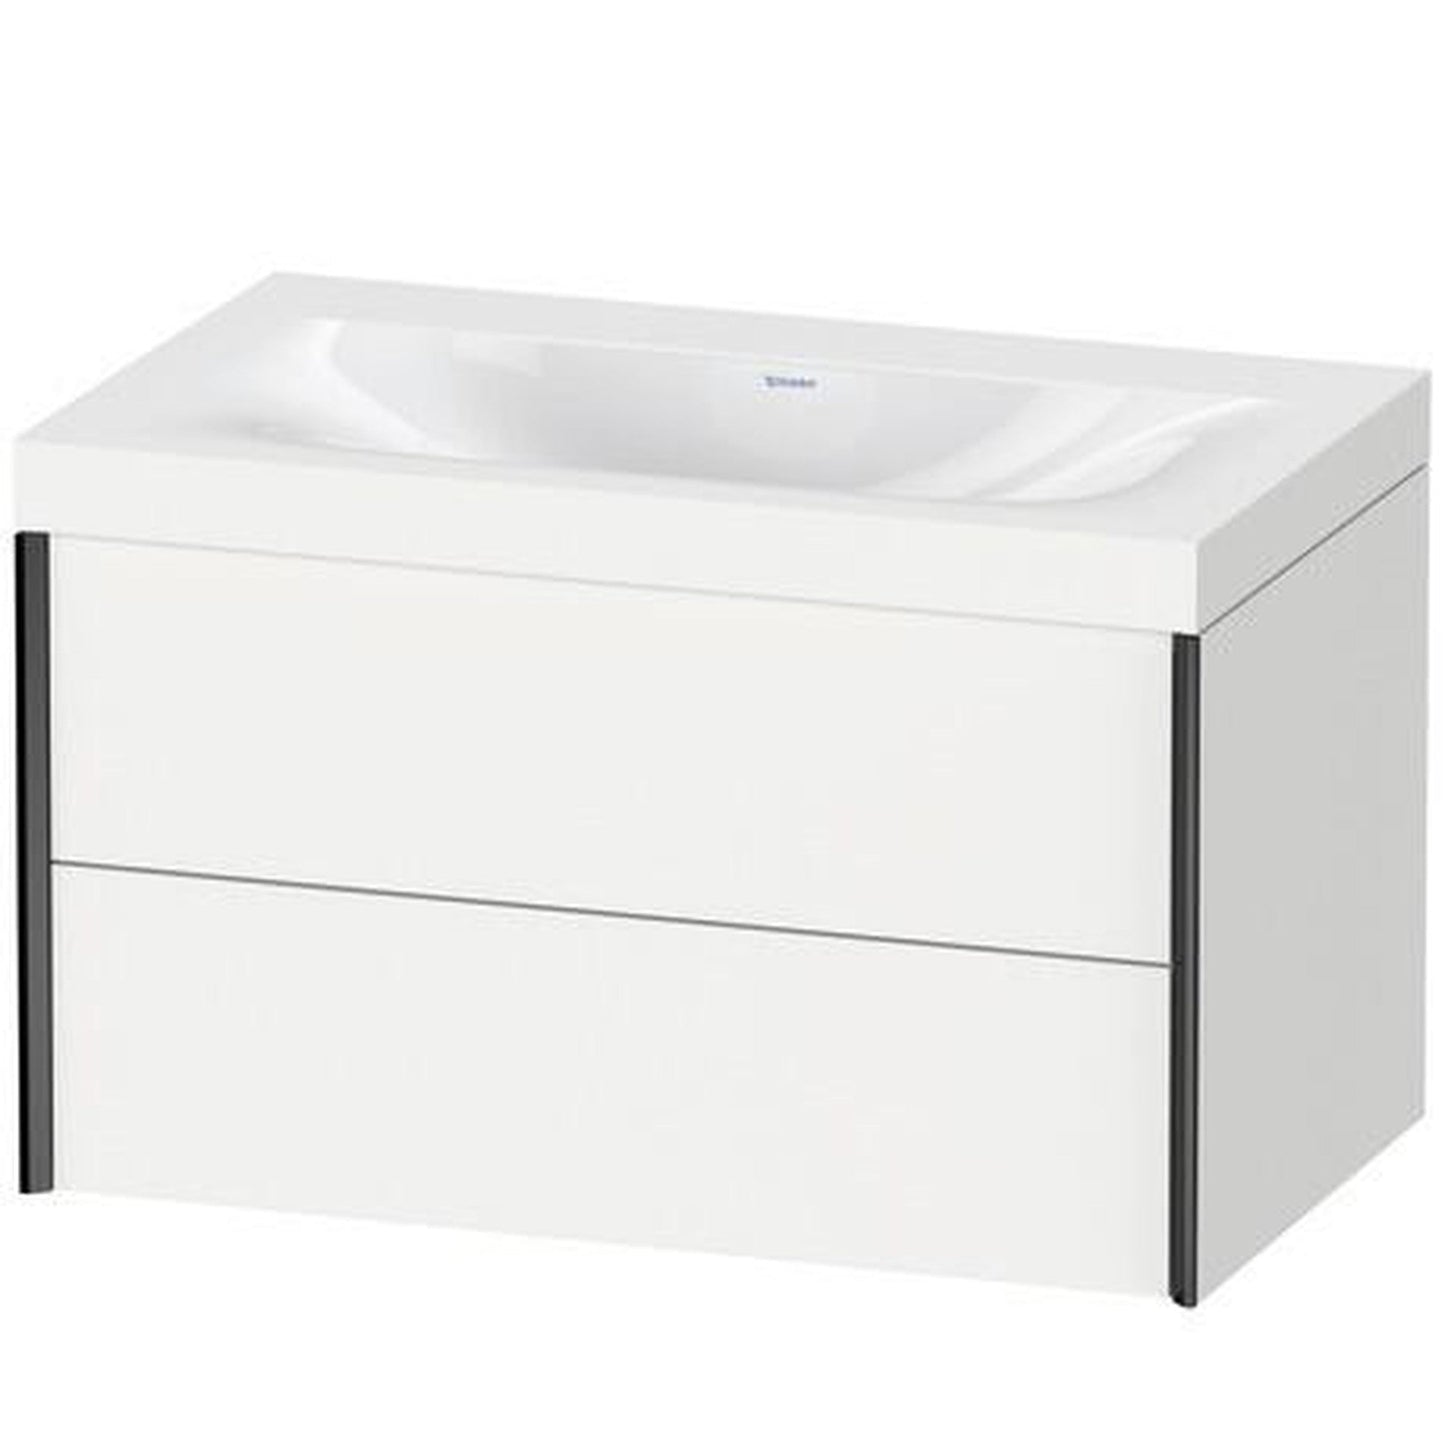 Duravit Xviu 31" x 20" x 19" Two Drawer C-Bonded Wall-Mount Vanity Kit Without Tap Hole, White (XV4615NB218C)